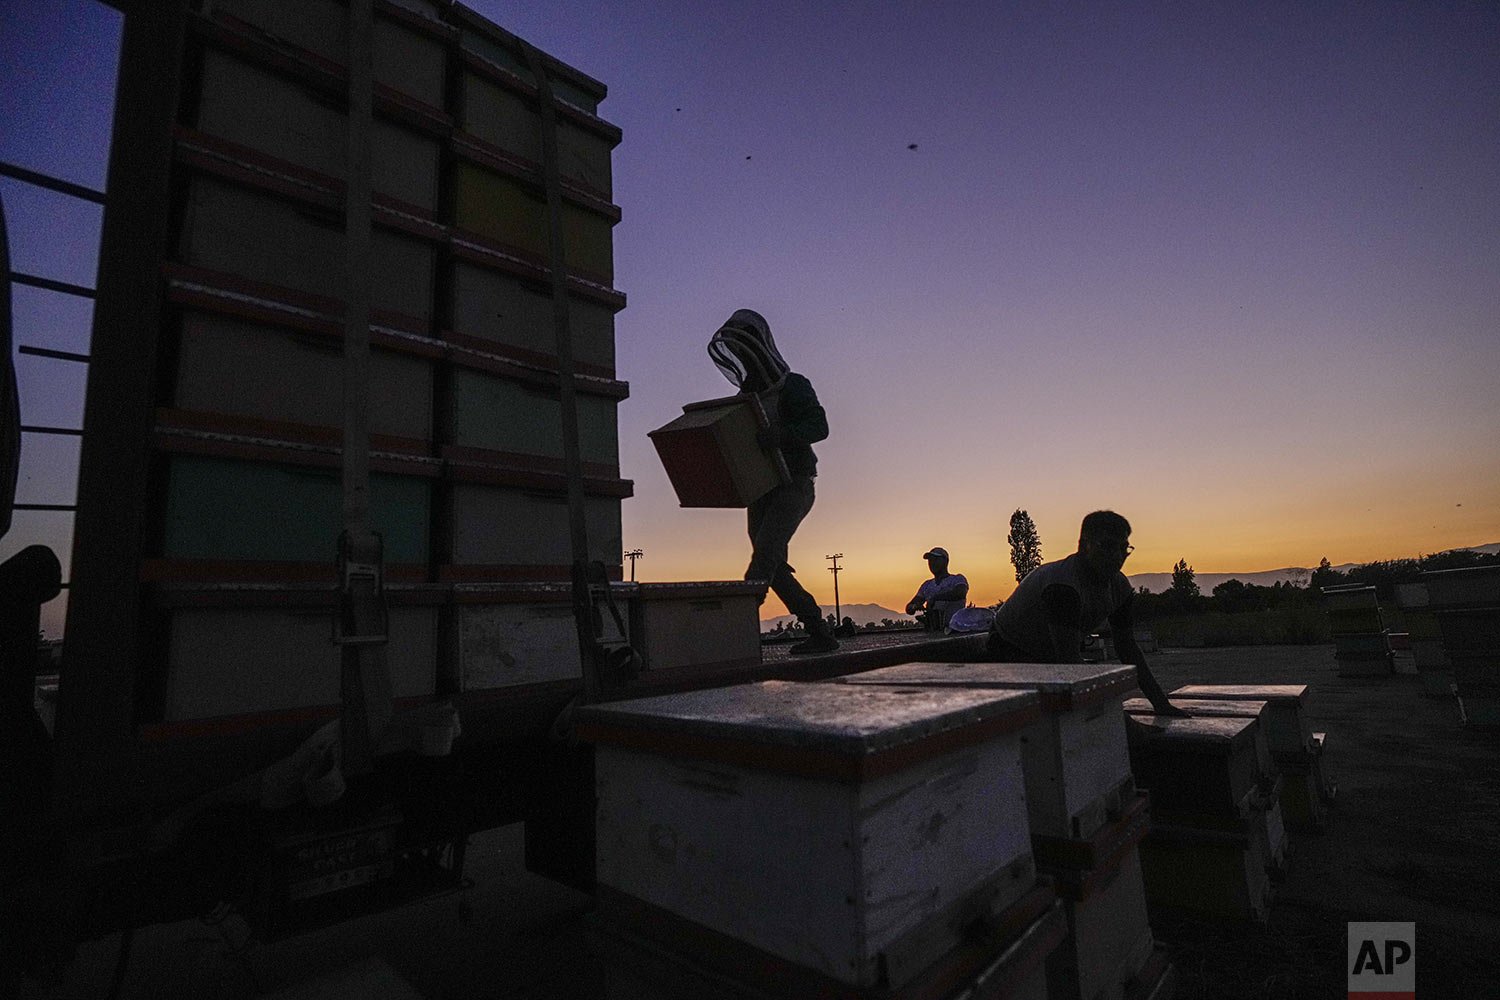  Brandon, the son of beekeeper Carlos Peralta, loads beehives on a truck to be relocated further south due to a drought in Colina on the outskirts of Santiago, Chile, Monday, Jan. 31, 2022. Chilean beekeepers face a shortage of flowers to feed their 